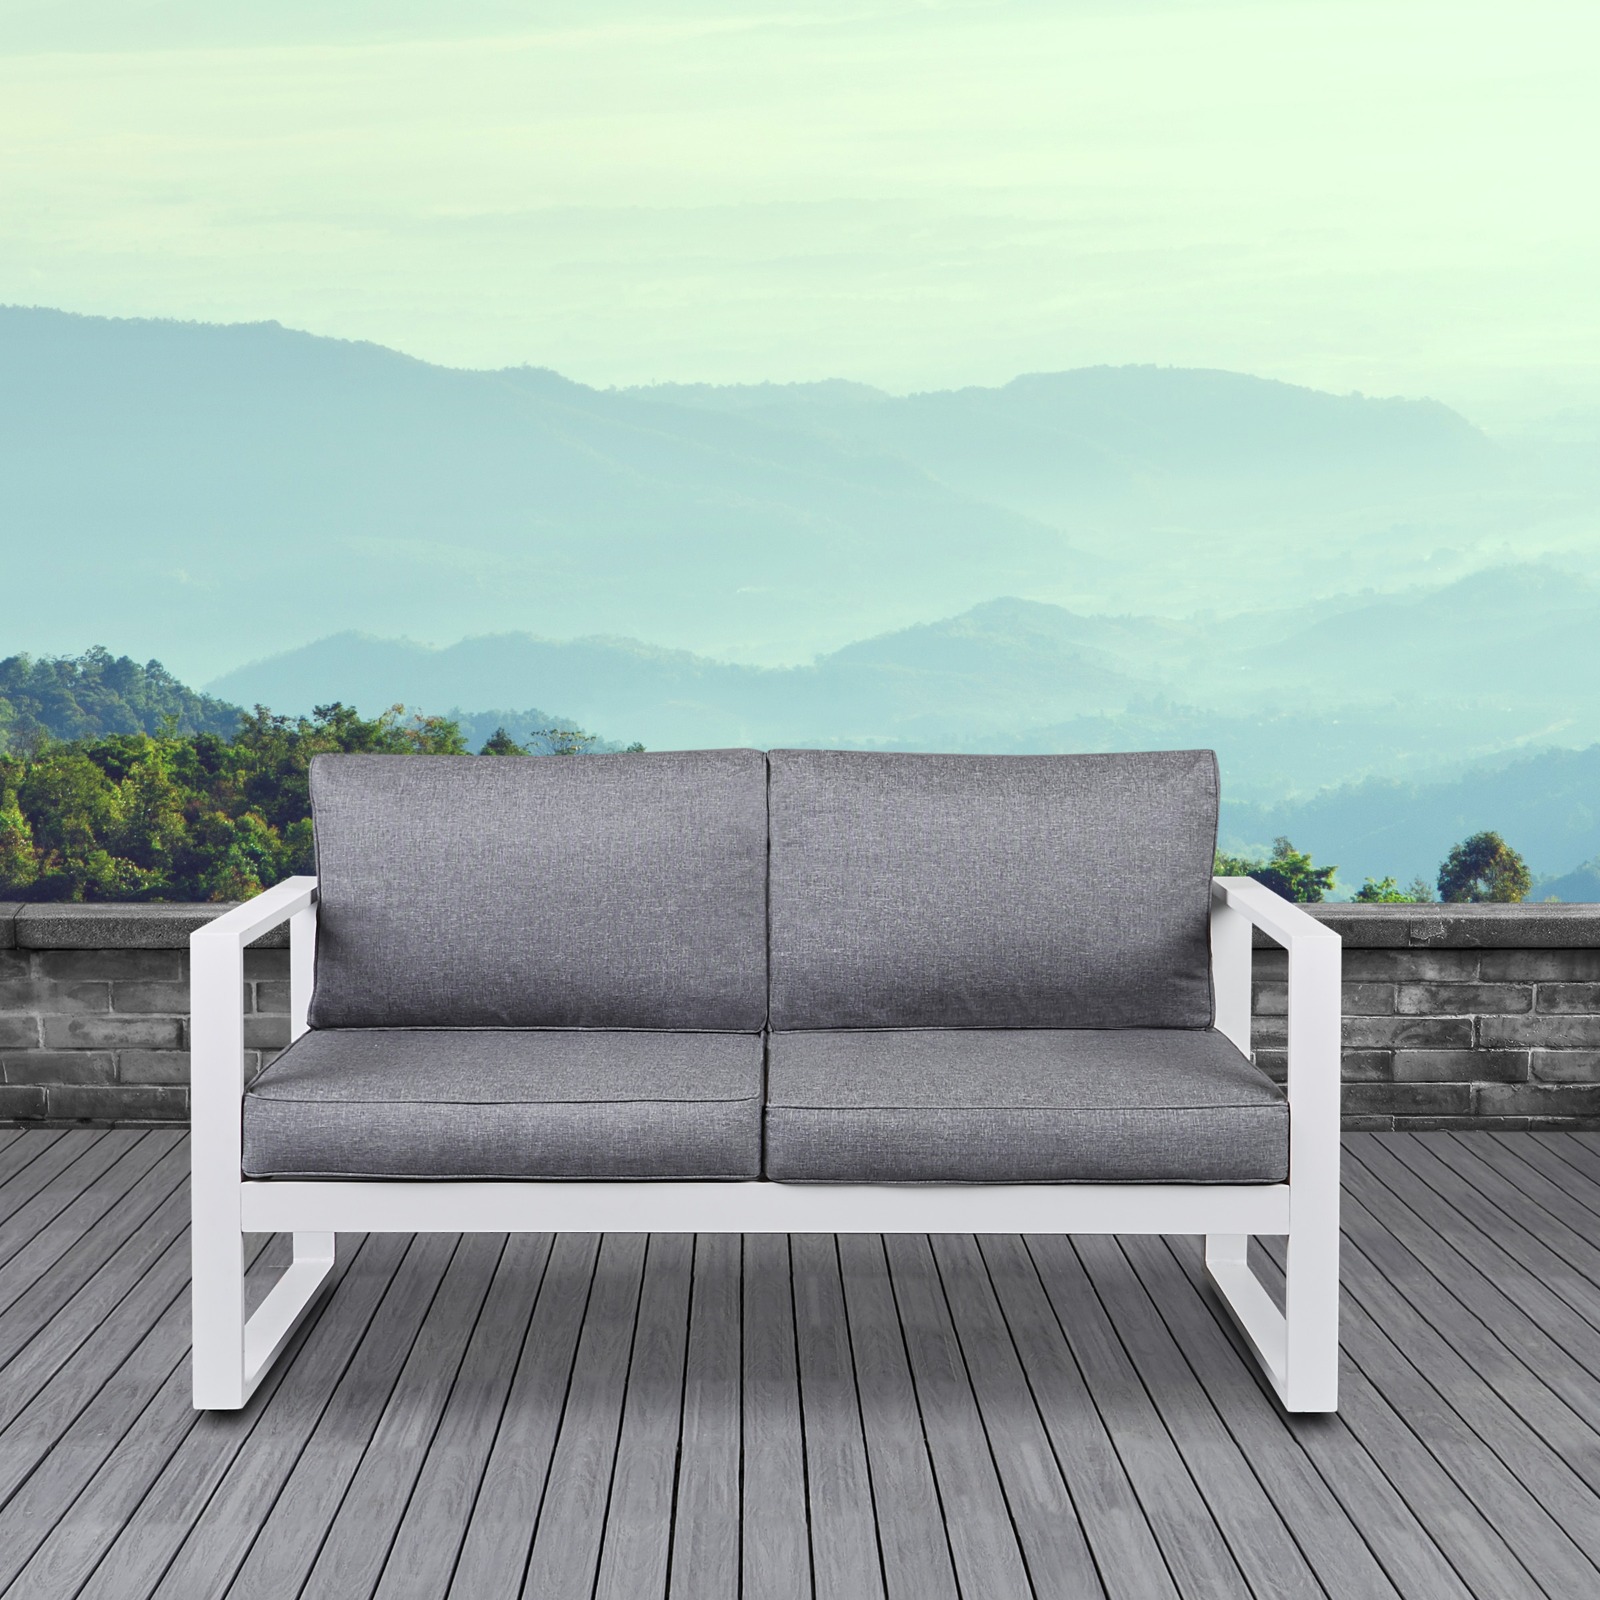 Baltic Outdoor Loveseat Patio Loveseat Outdoor Two Seat Bench Patio Furniture